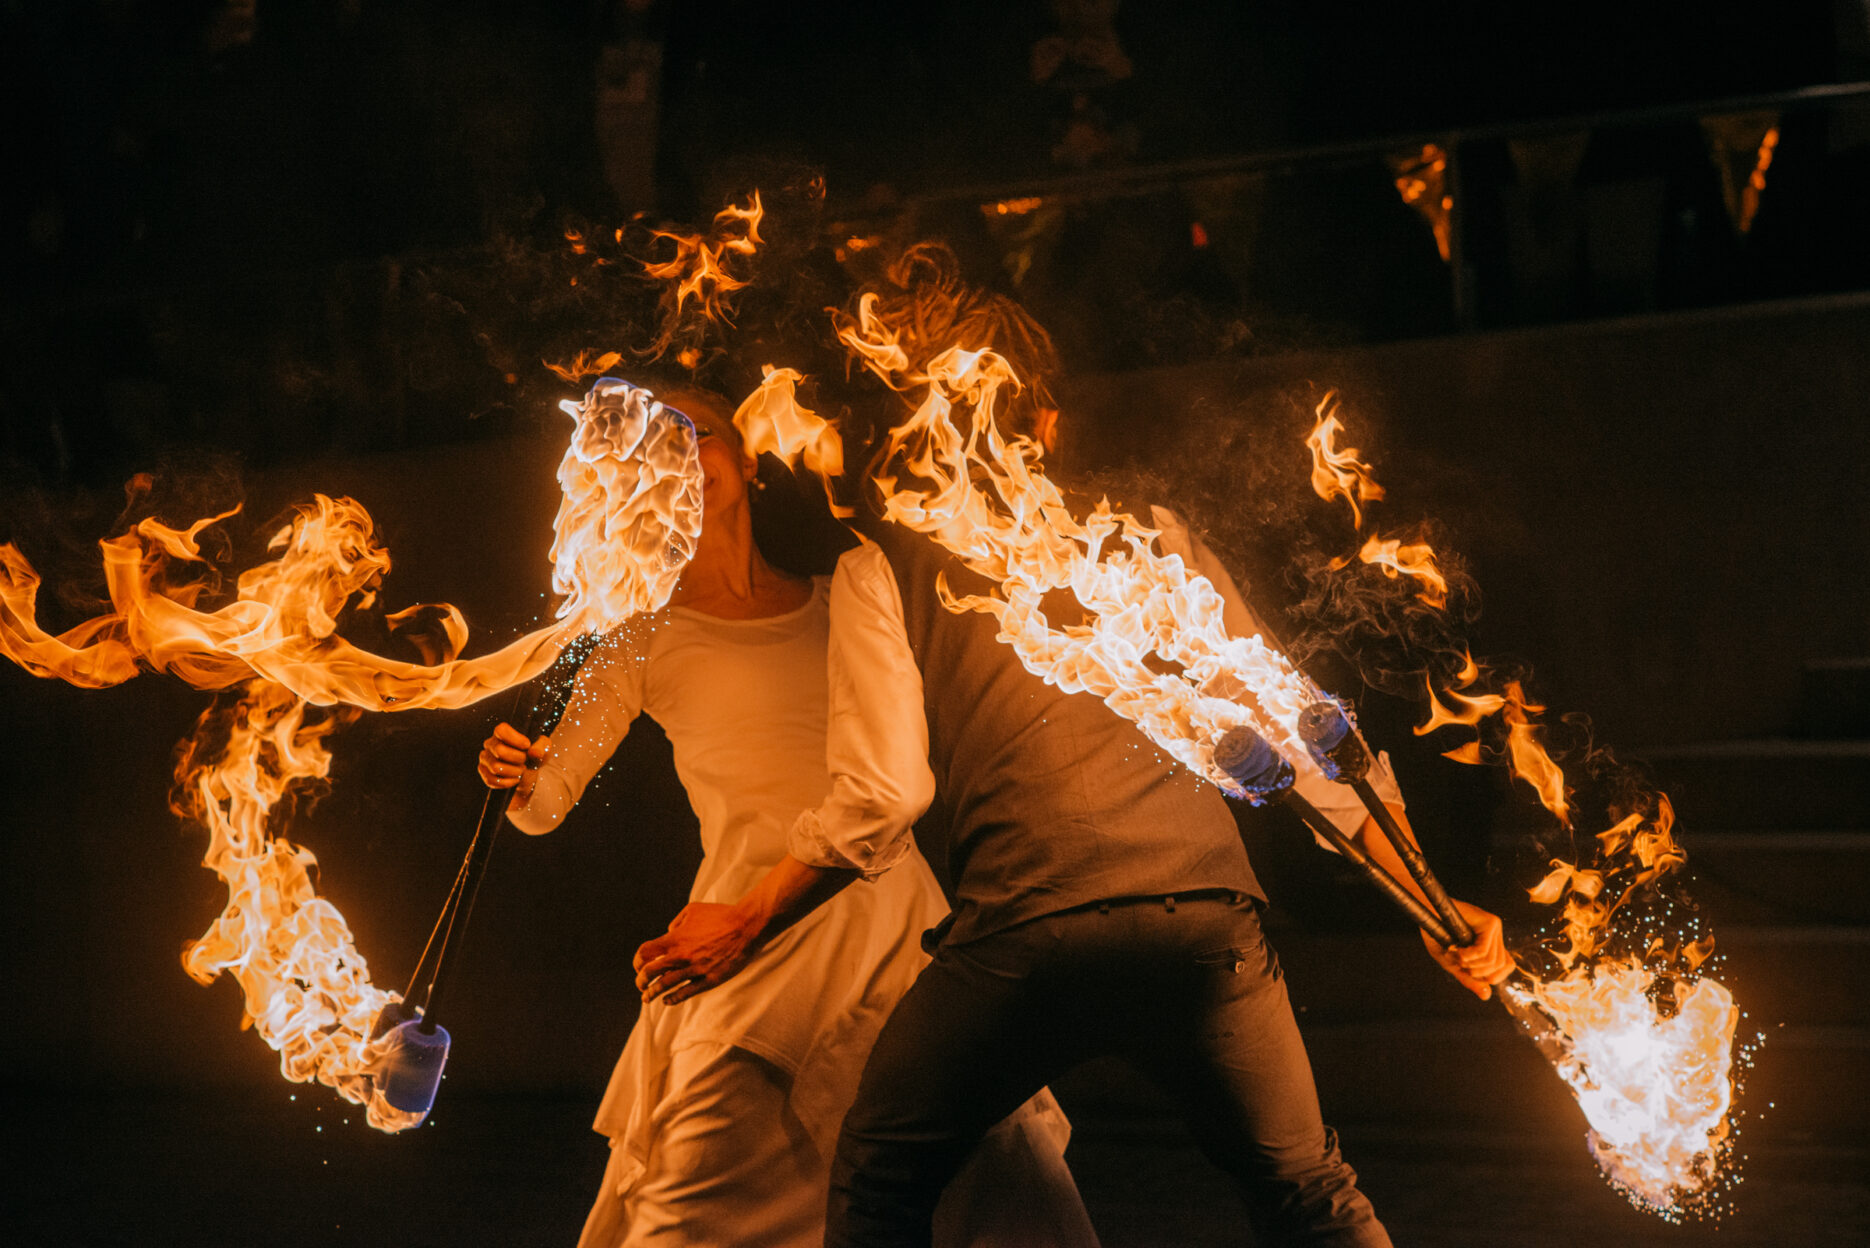 Two fire artists performing